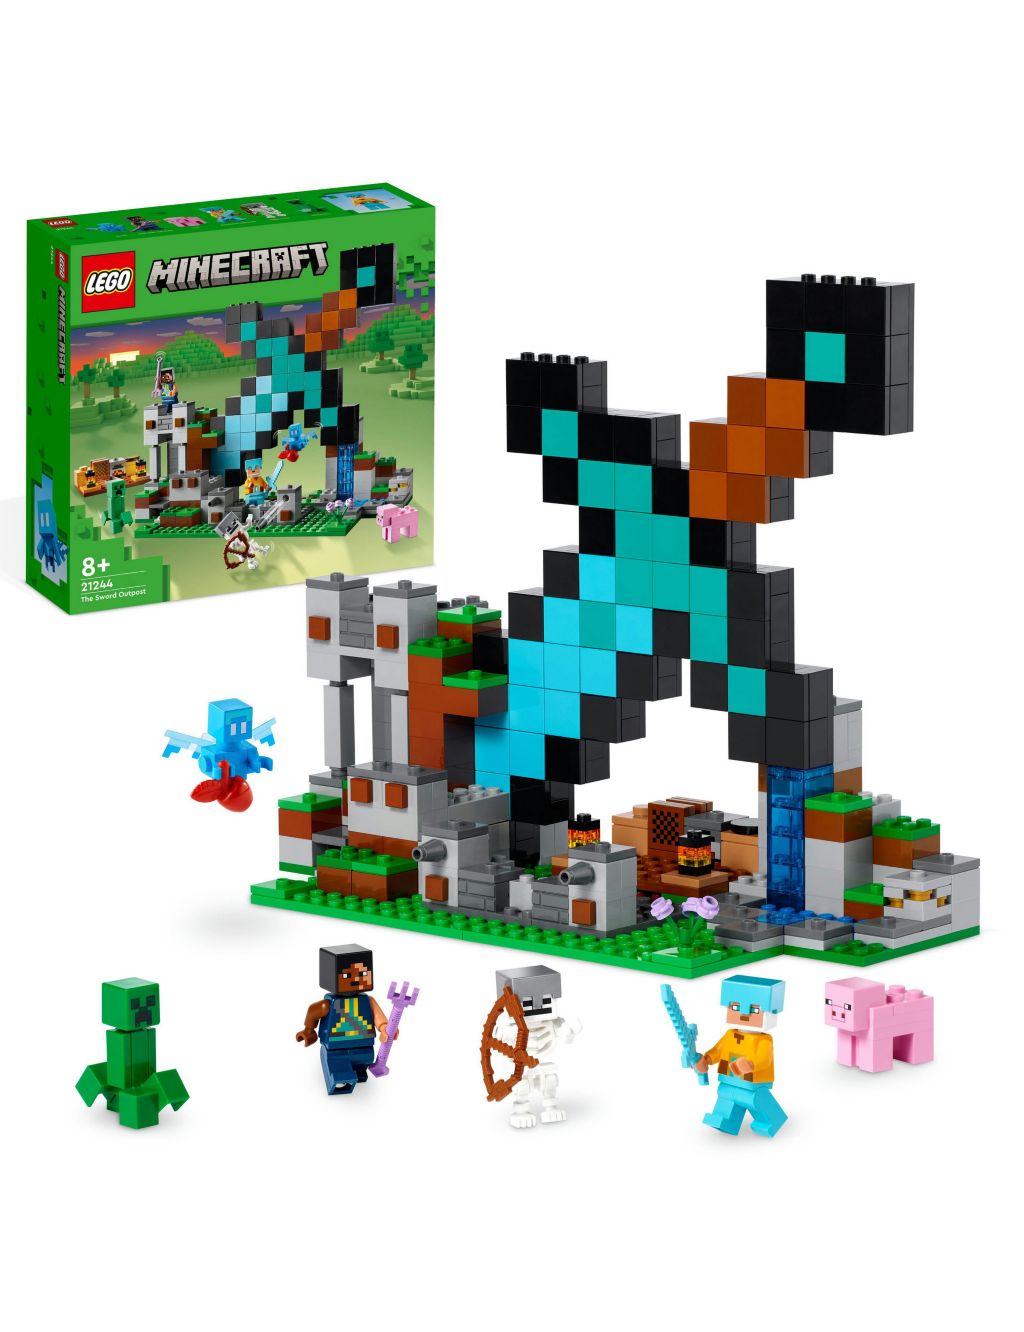 LEGO Minecraft The Bee Cottage 21241 Building Set - Construction Toy with  Buildable House, Farm, Baby Zombie, and Animal Figures, Game Inspired  Birthday Gift Idea for Boys and Girls Ages 8+ 